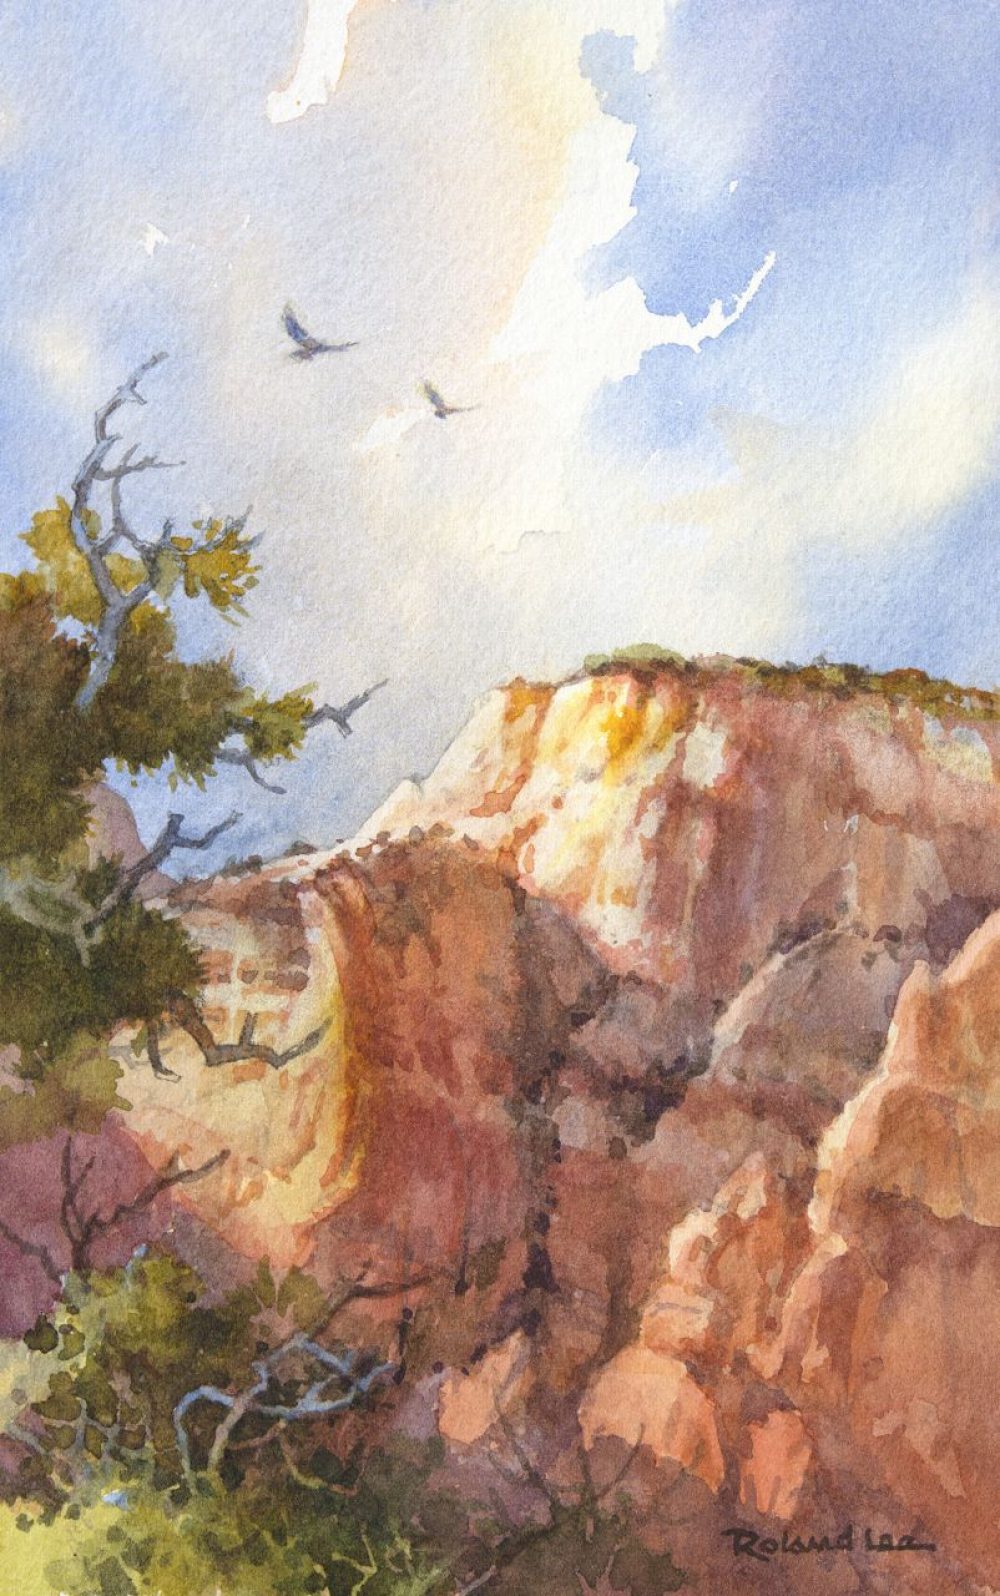 Riding the Currents - Watercolor Painting of Zion National Park